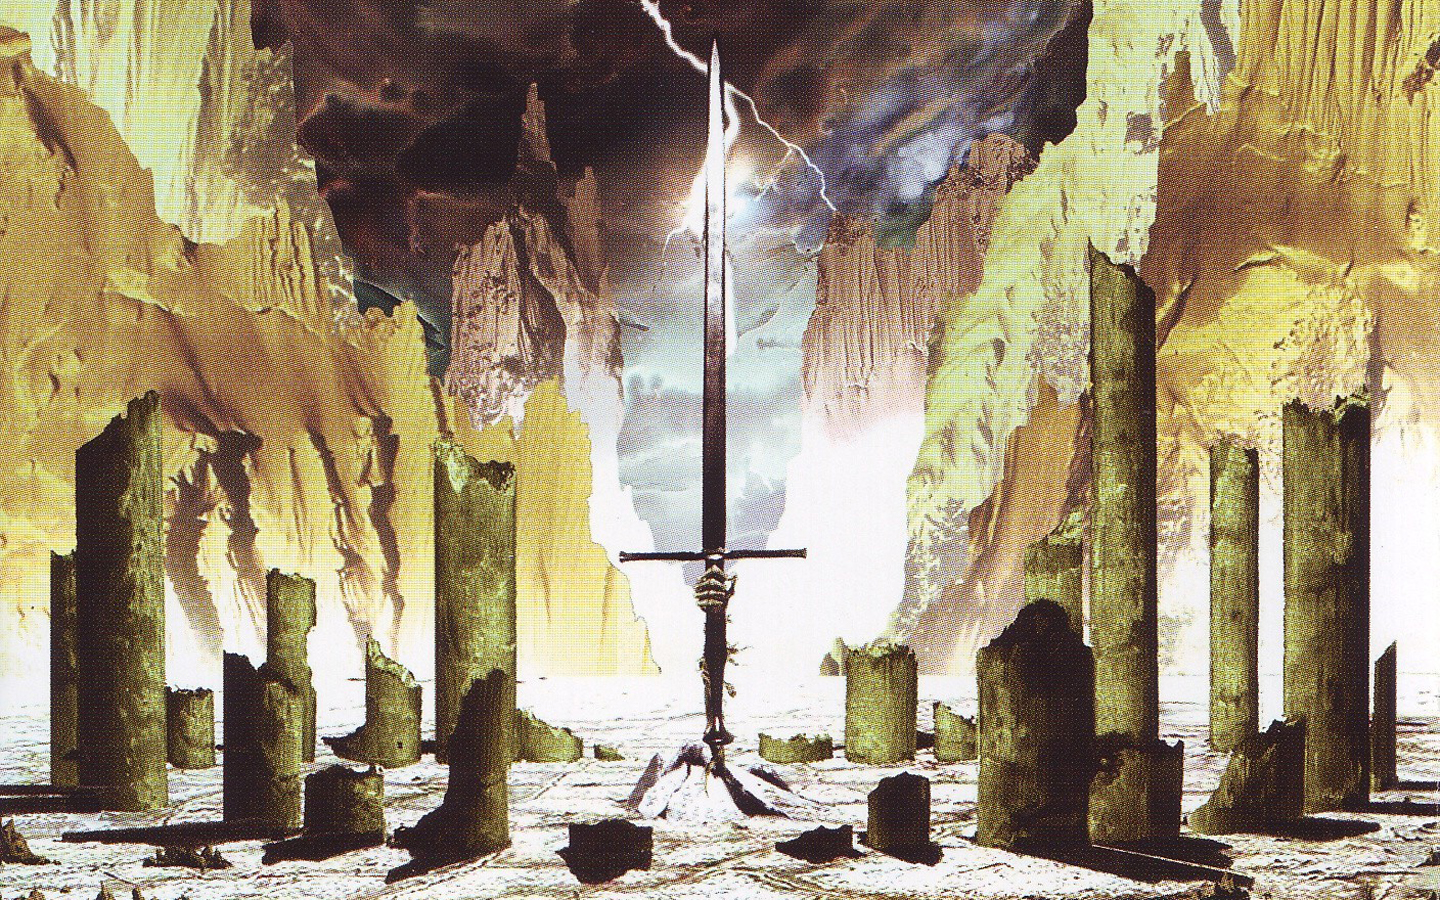 Popular The Sword Image for Phone